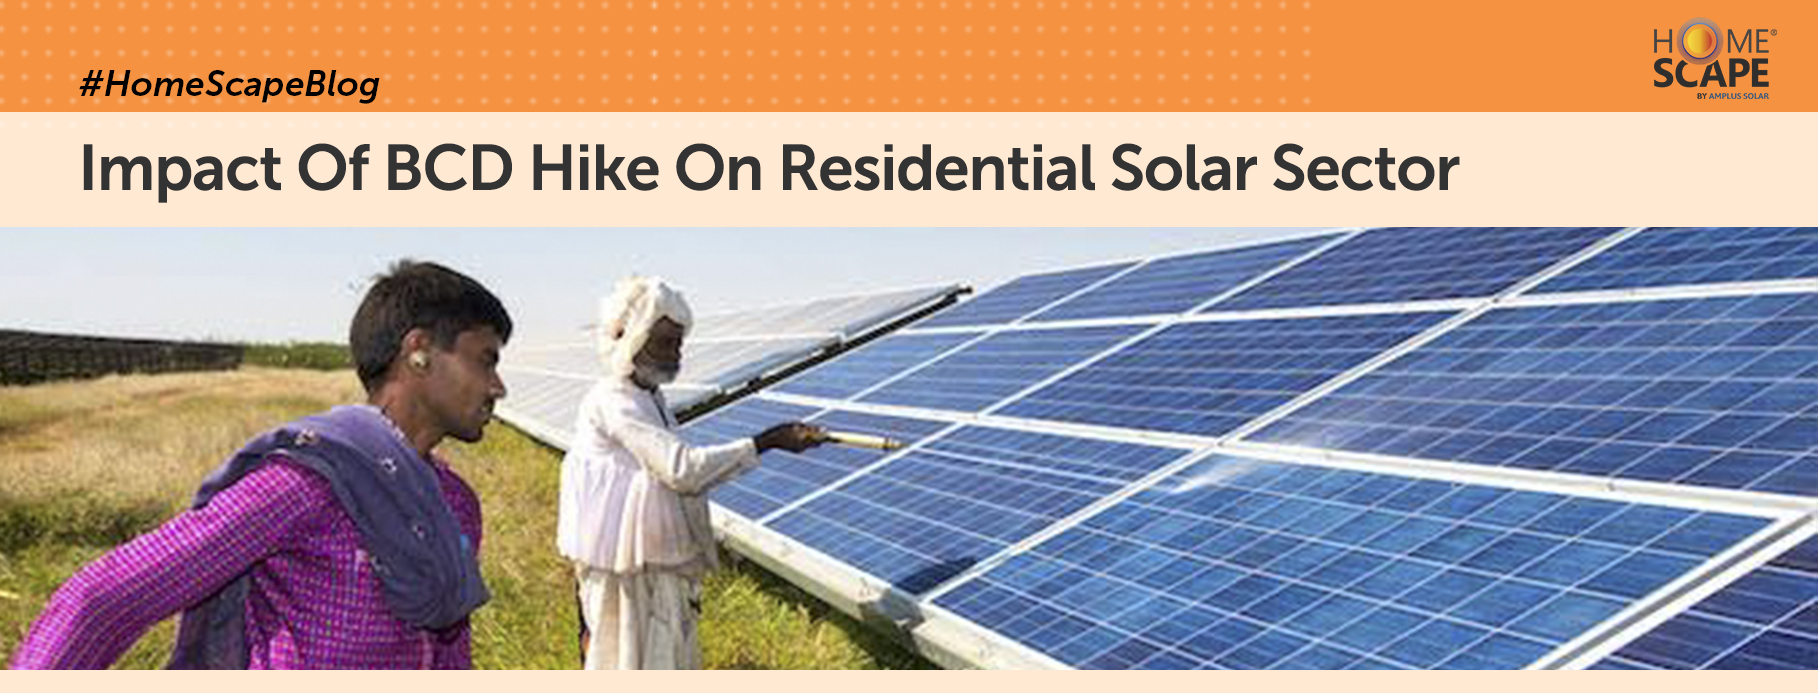 Impact Of BCD Hike On Residential Solar Sector